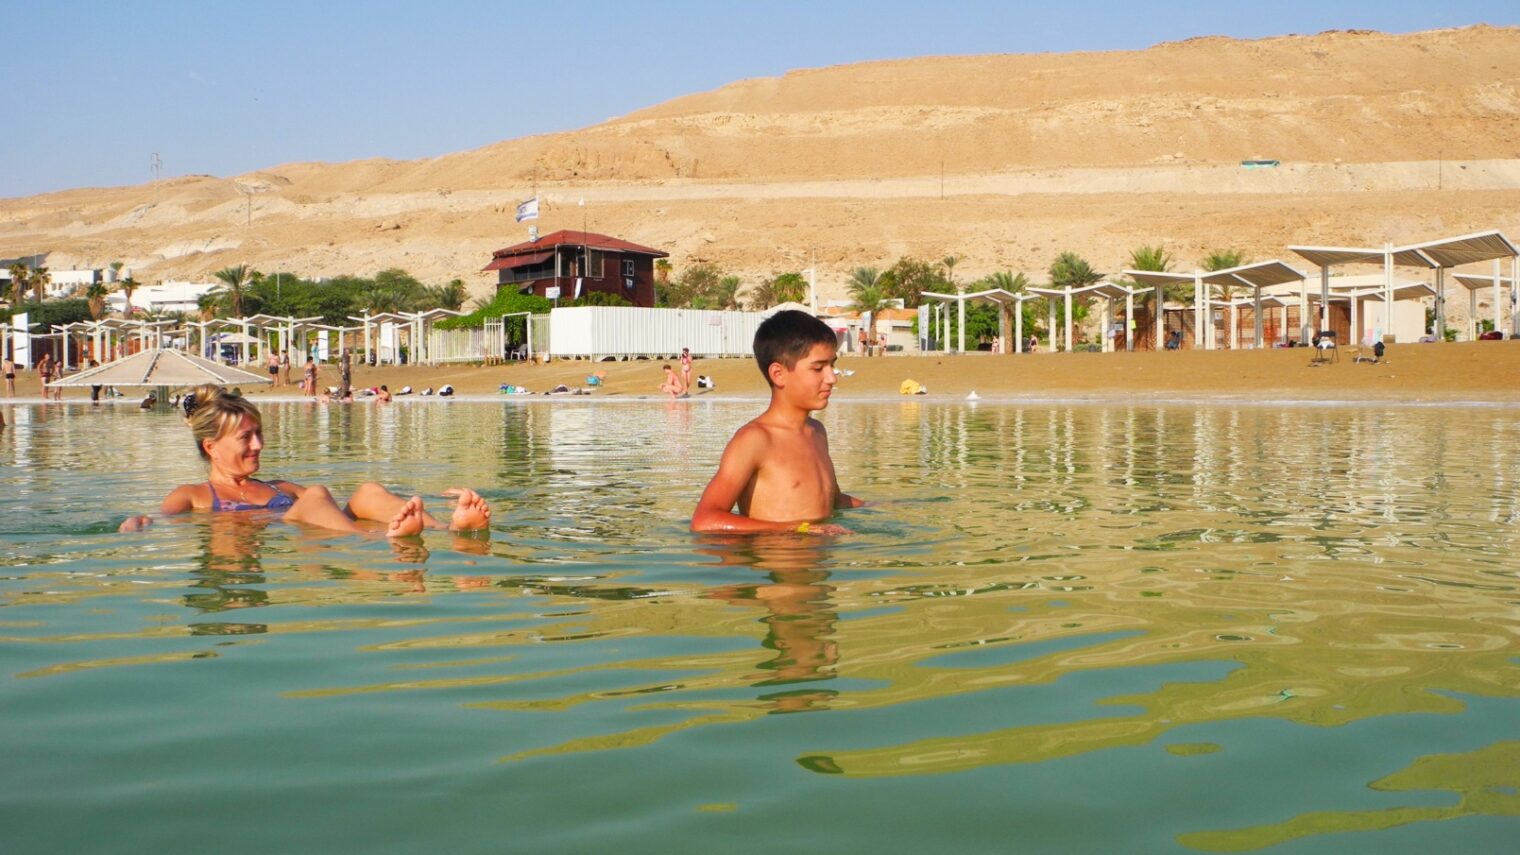 Floating in the Dead Sea is a favorite family activity. Photo by Jana Janina/Shutterstock.com